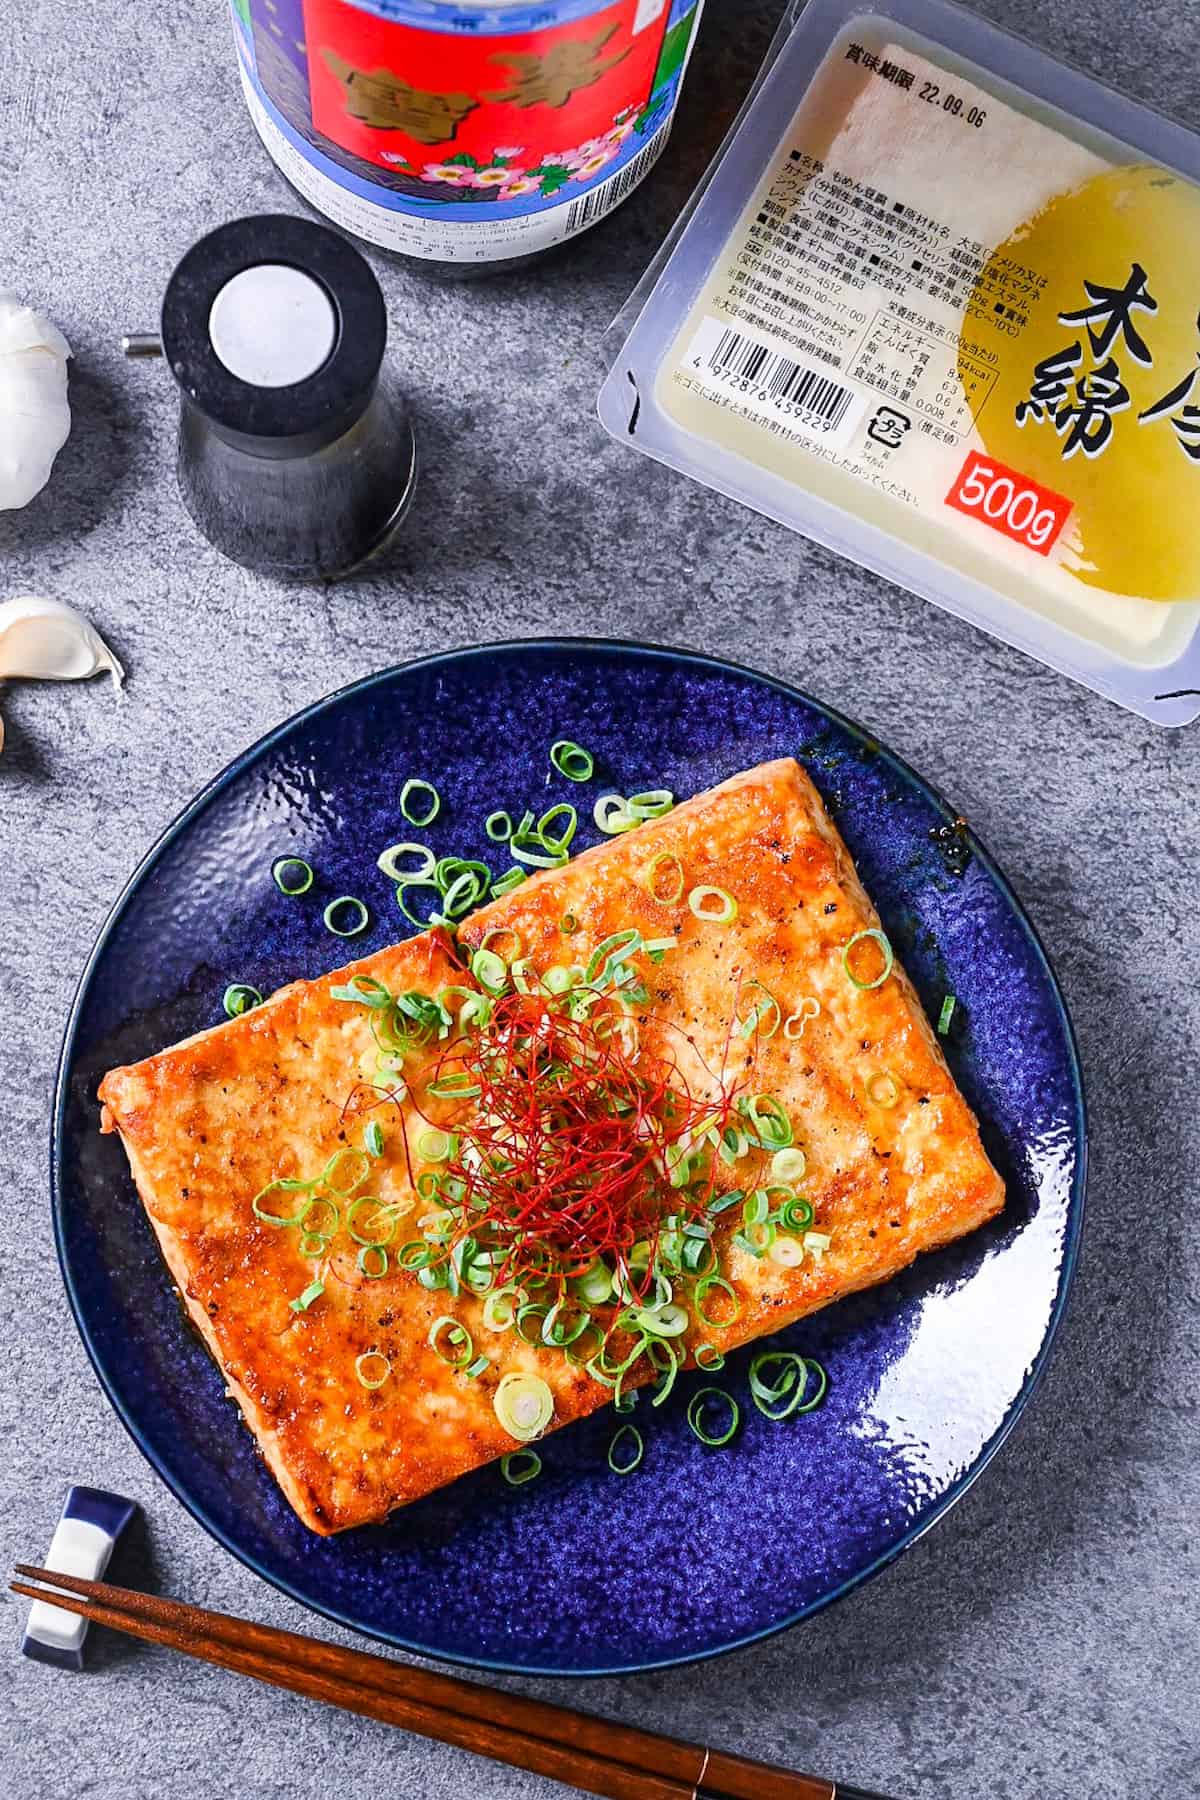 Tofu steak coated in a Japanese style sauce topped with spring onion and chili threads on a blue plate with ingredients of tofu, soy sauce, mirin and garlic